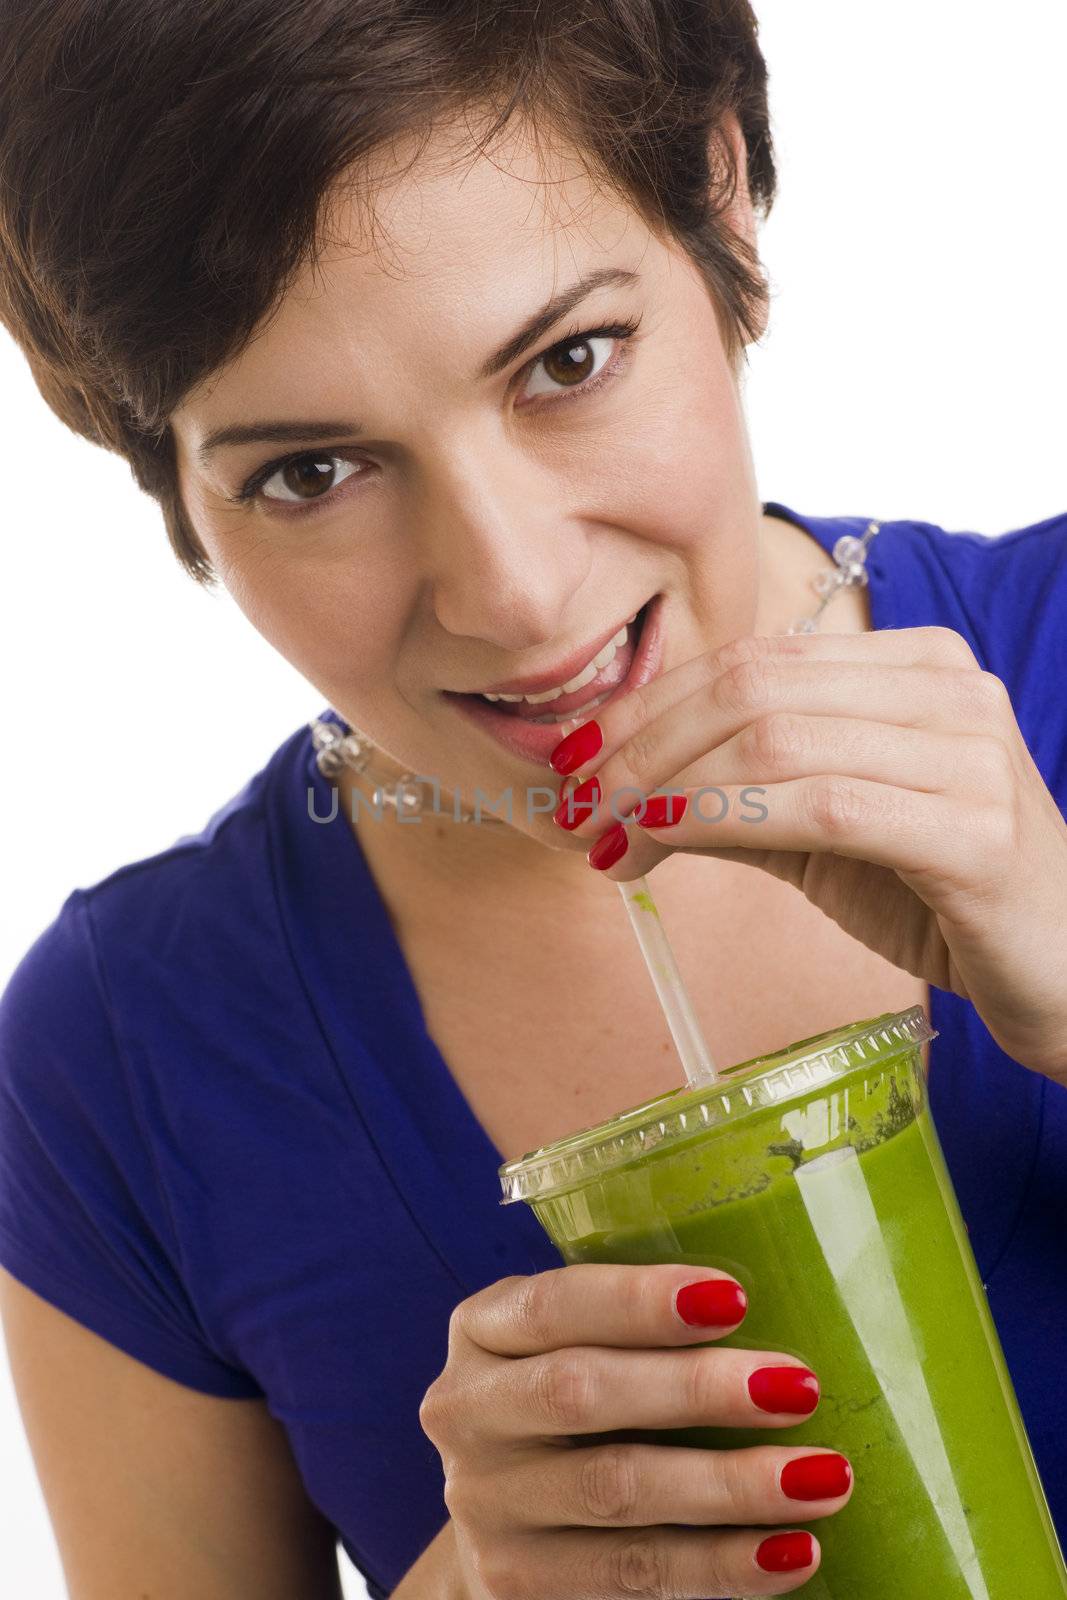 Beautiful woman with manicured nails sips a green smoothie